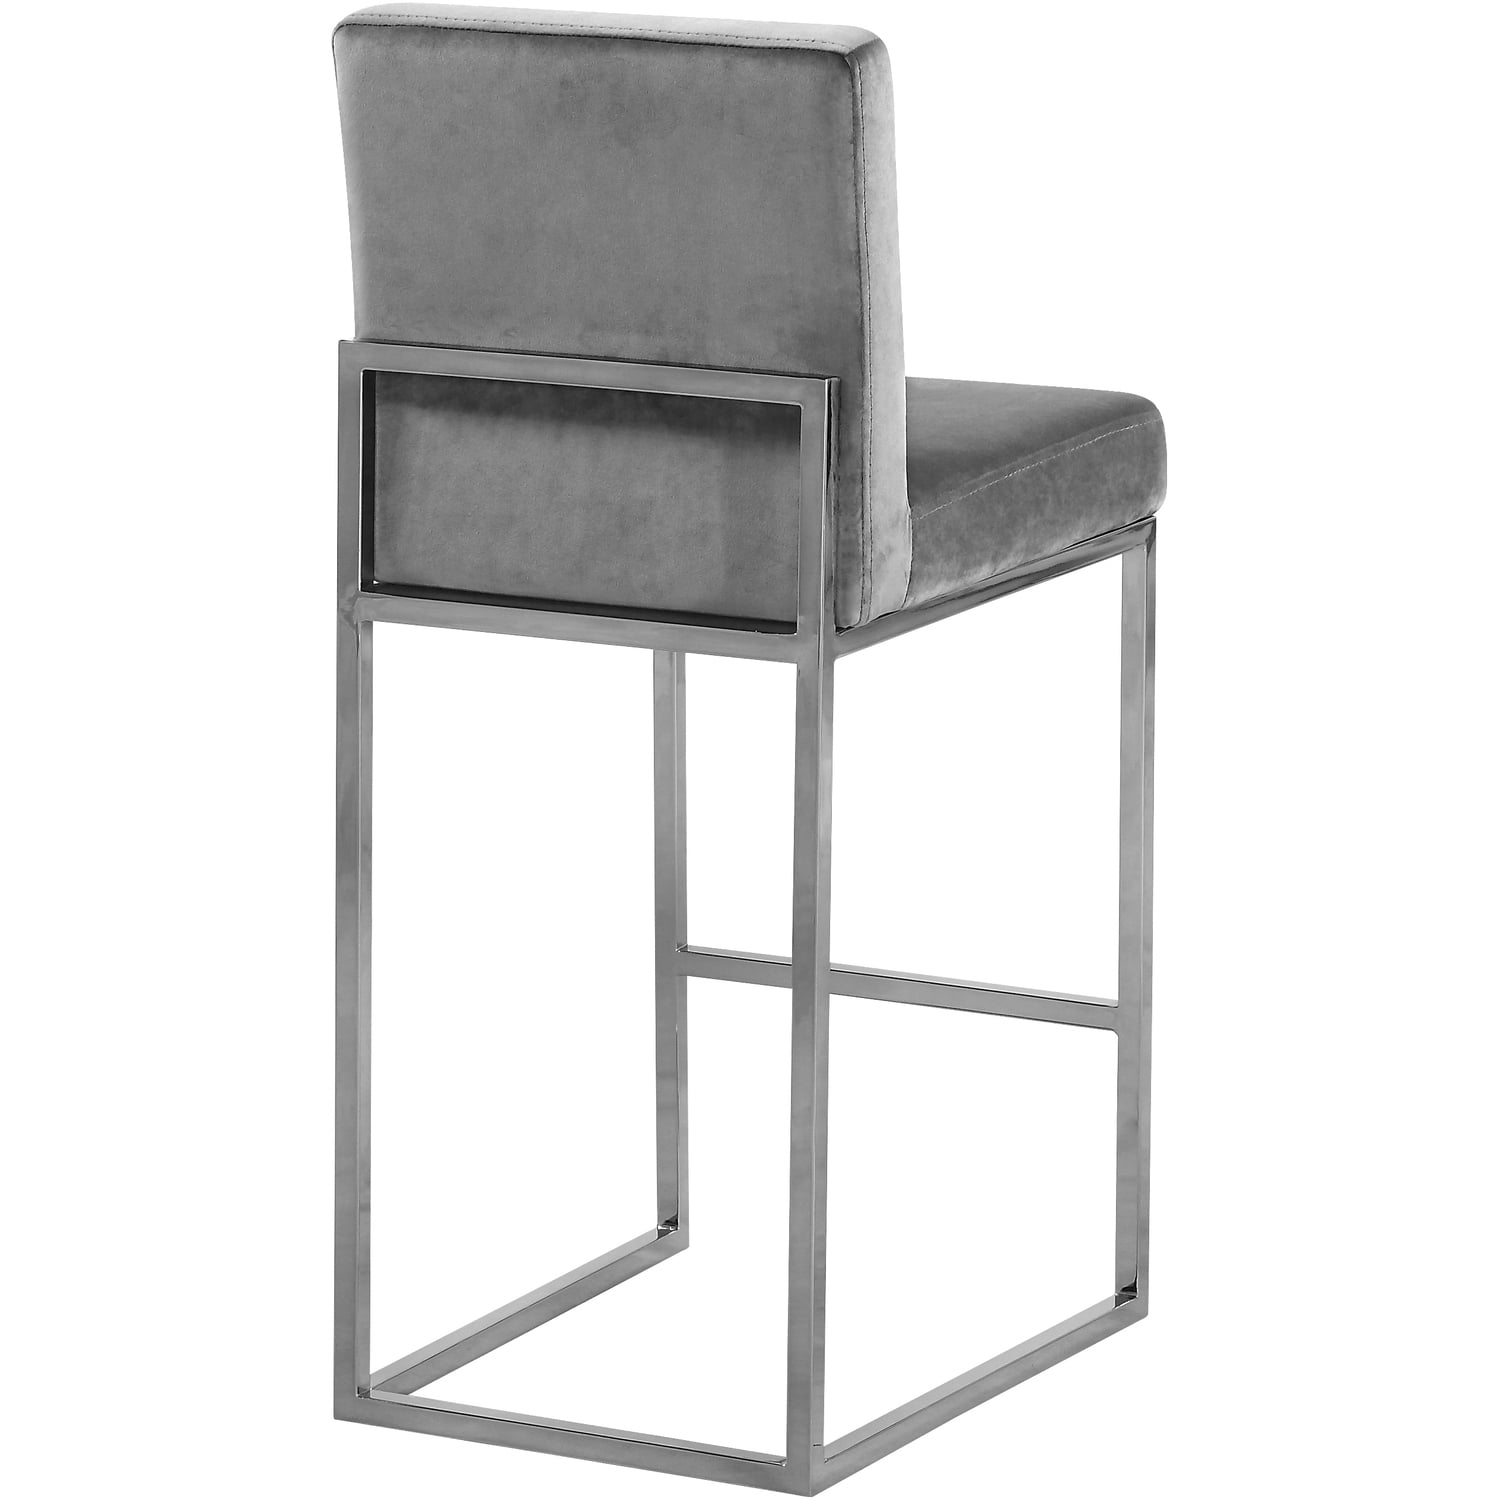 Meridian Furniture Giselle Collection Modern Contemporary Velvet Upholstered Channel Tufted Counter Stool with Polished Chrome Metal Base 16 W x 19 D x 37.5 H Grey 